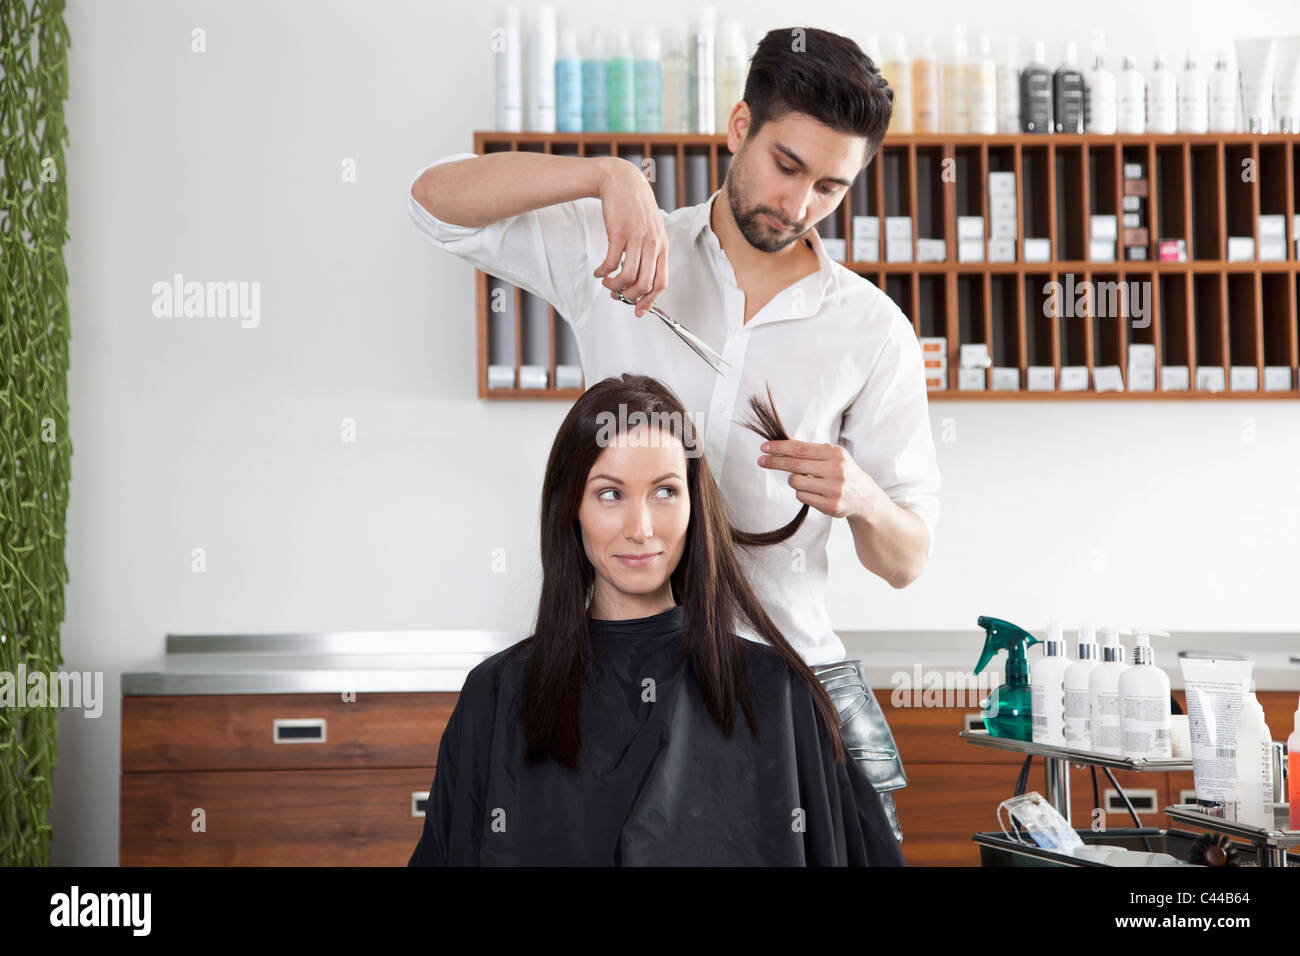 A woman having her hair cut by a male hairdresser Stock Photo